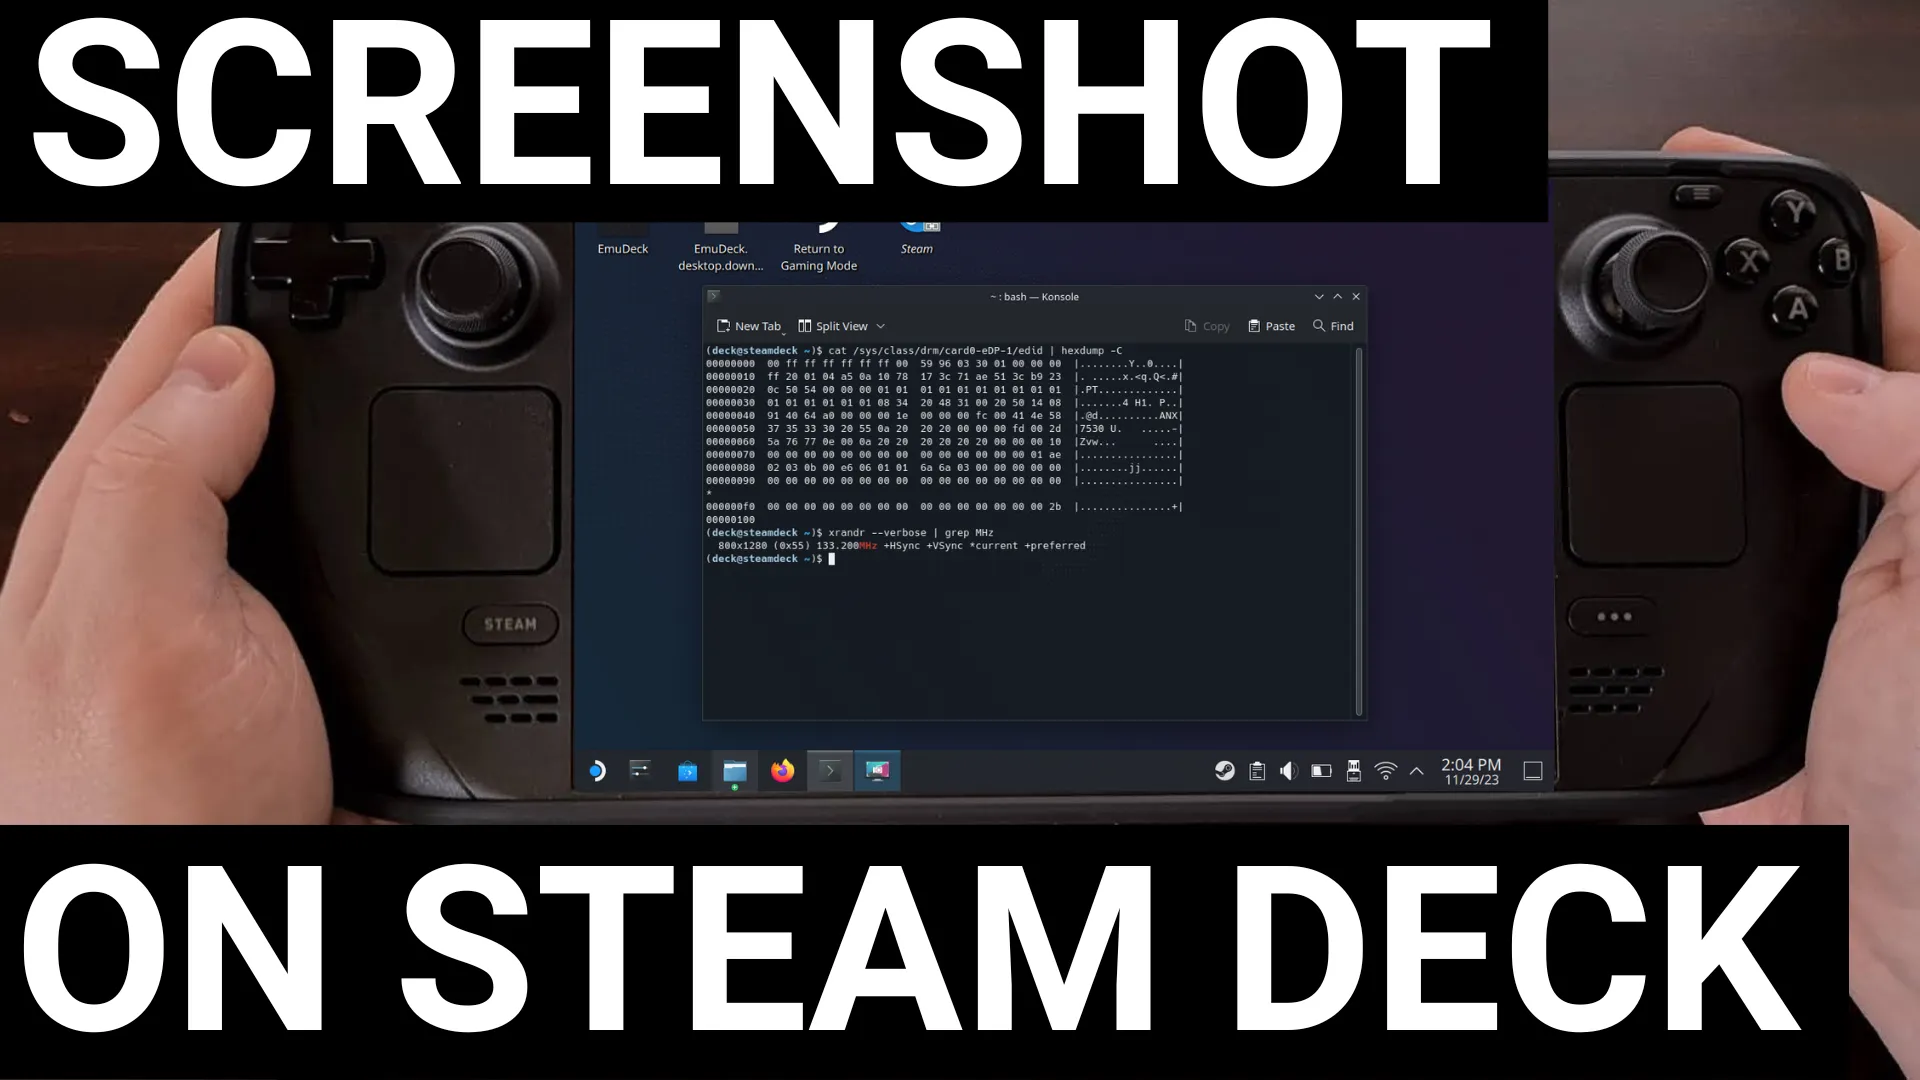 steam deck screenshot tutorial guide for both desktop and gaming modes